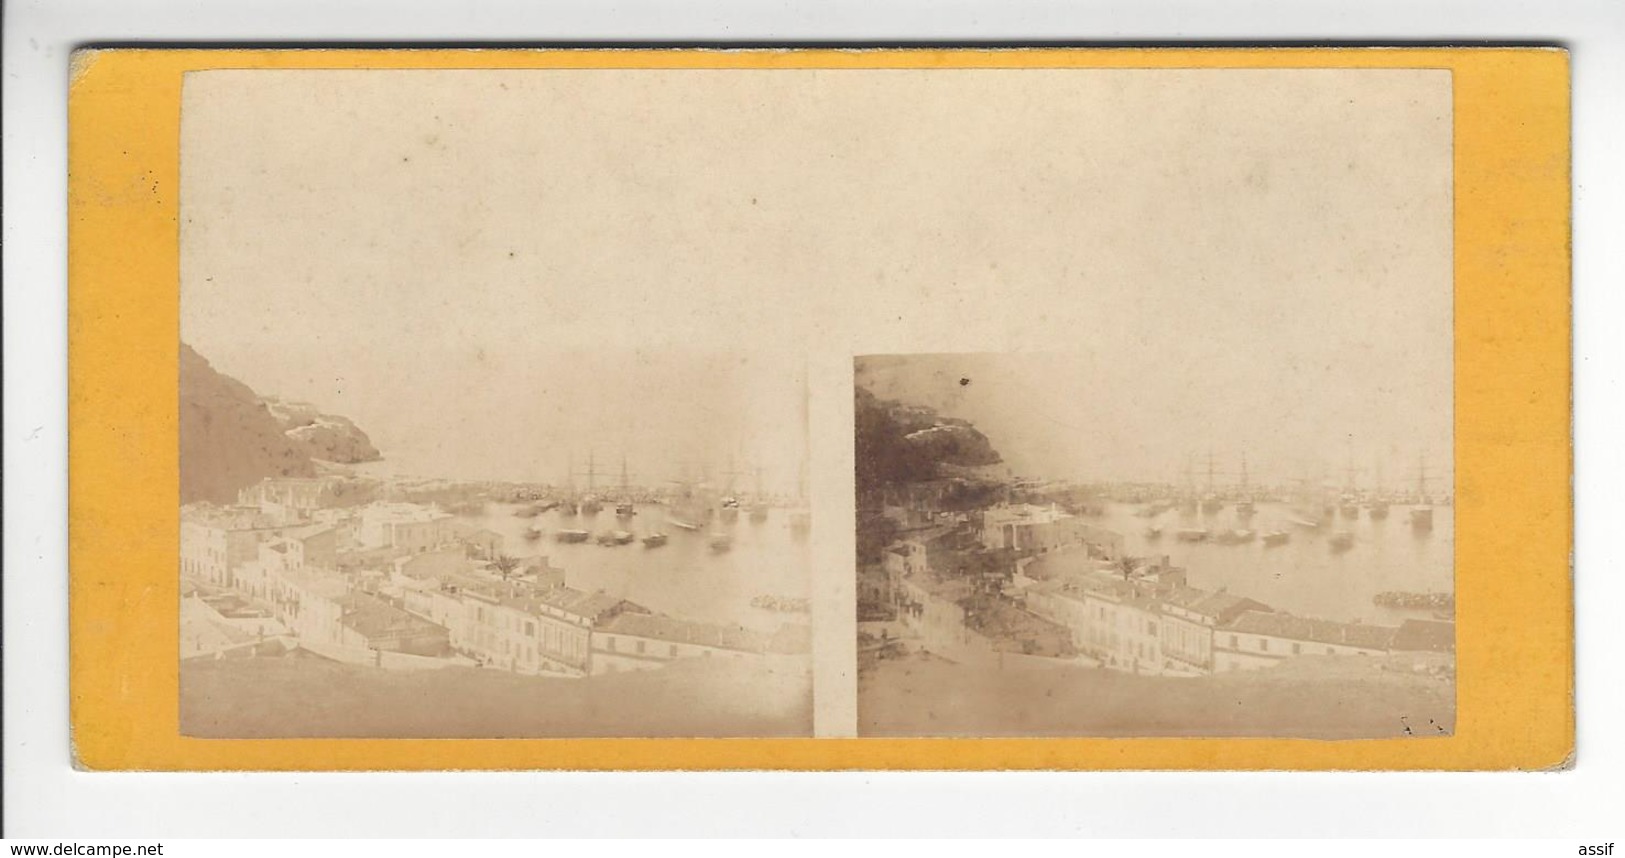 ALGERIE ORAN LE PORT PHOTO STEREO CIRCA 1870 /FREE SHIPPING REGISTERED - Stereo-Photographie